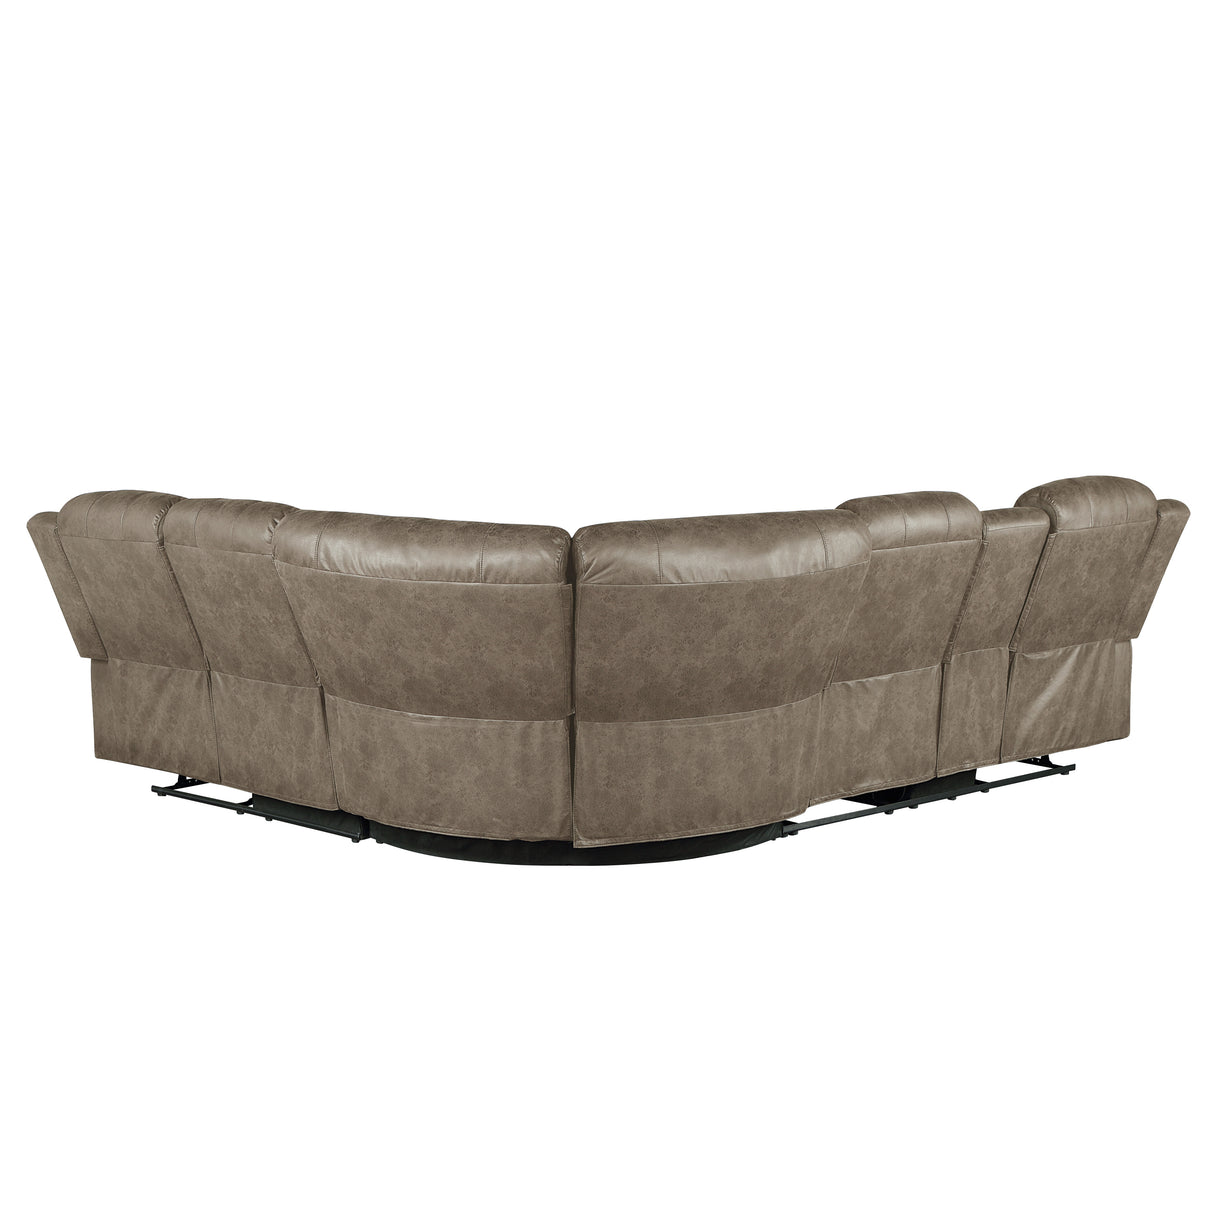 9479SDB*SC (3)3-Piece Reclining Sectional with Left Console - Luna Furniture